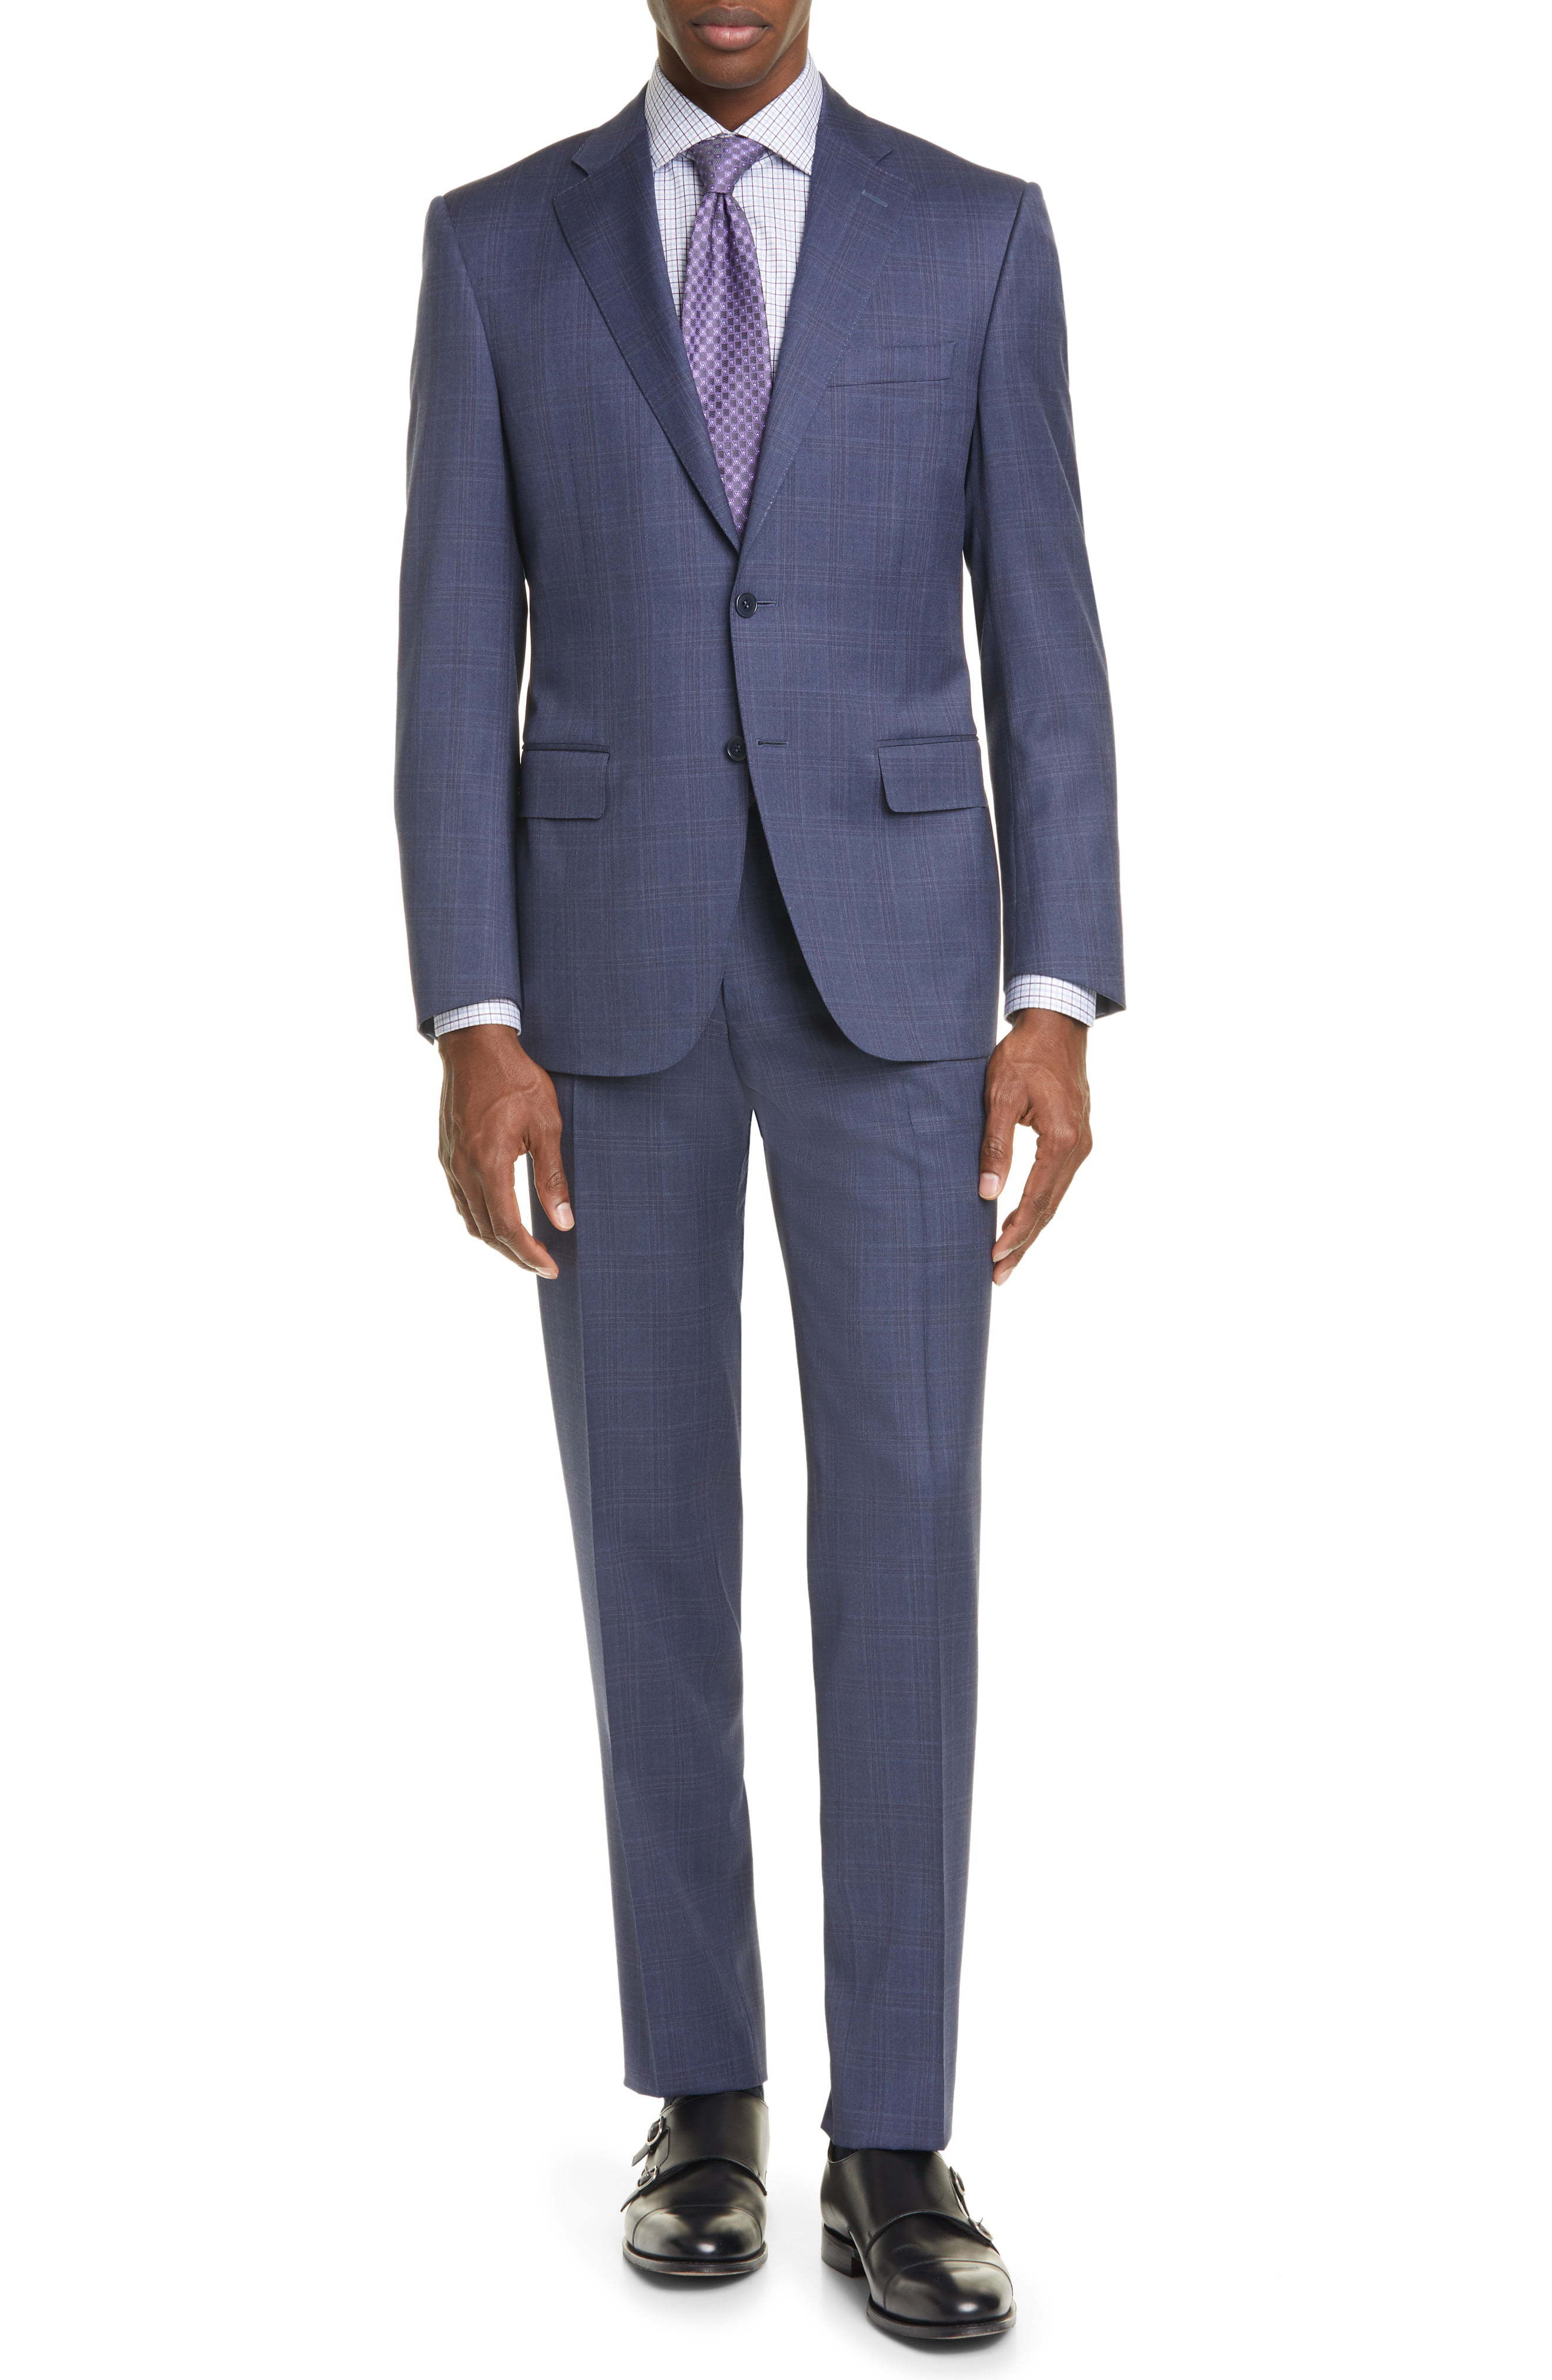 Canali Siena Soft Classic Fit Plaid Wool Suit, $1,042 | Nordstrom ...